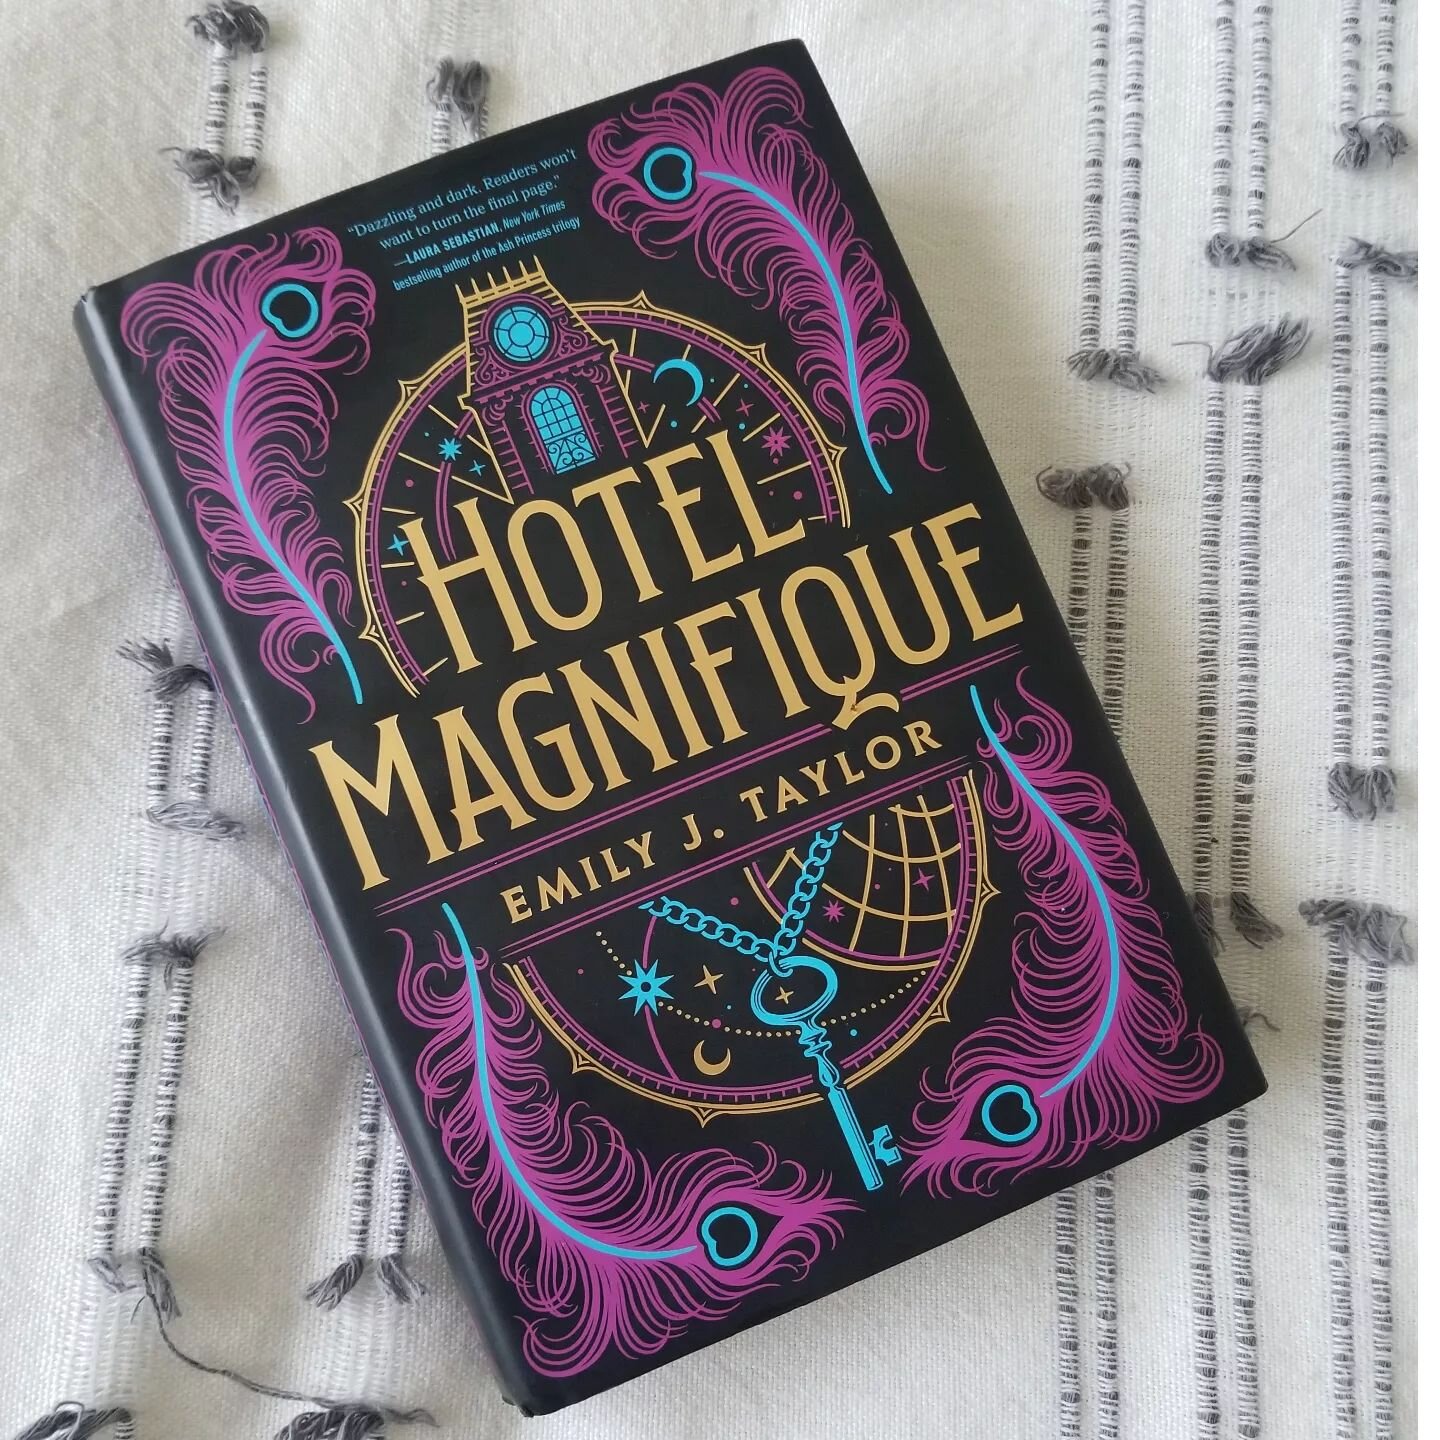 ✒ Book Review 🧭
Hotel Magnifique by Emily J. Taylor (@emilycanwrite)
⭐⭐⭐⭐⭐ (5/5 Stars)

This debut novel from Emily J. Taylor is darkly enchanting, mysterious, and full of opulent spectacle. Taylor&rsquo;s imagination is out of this world, and I fel